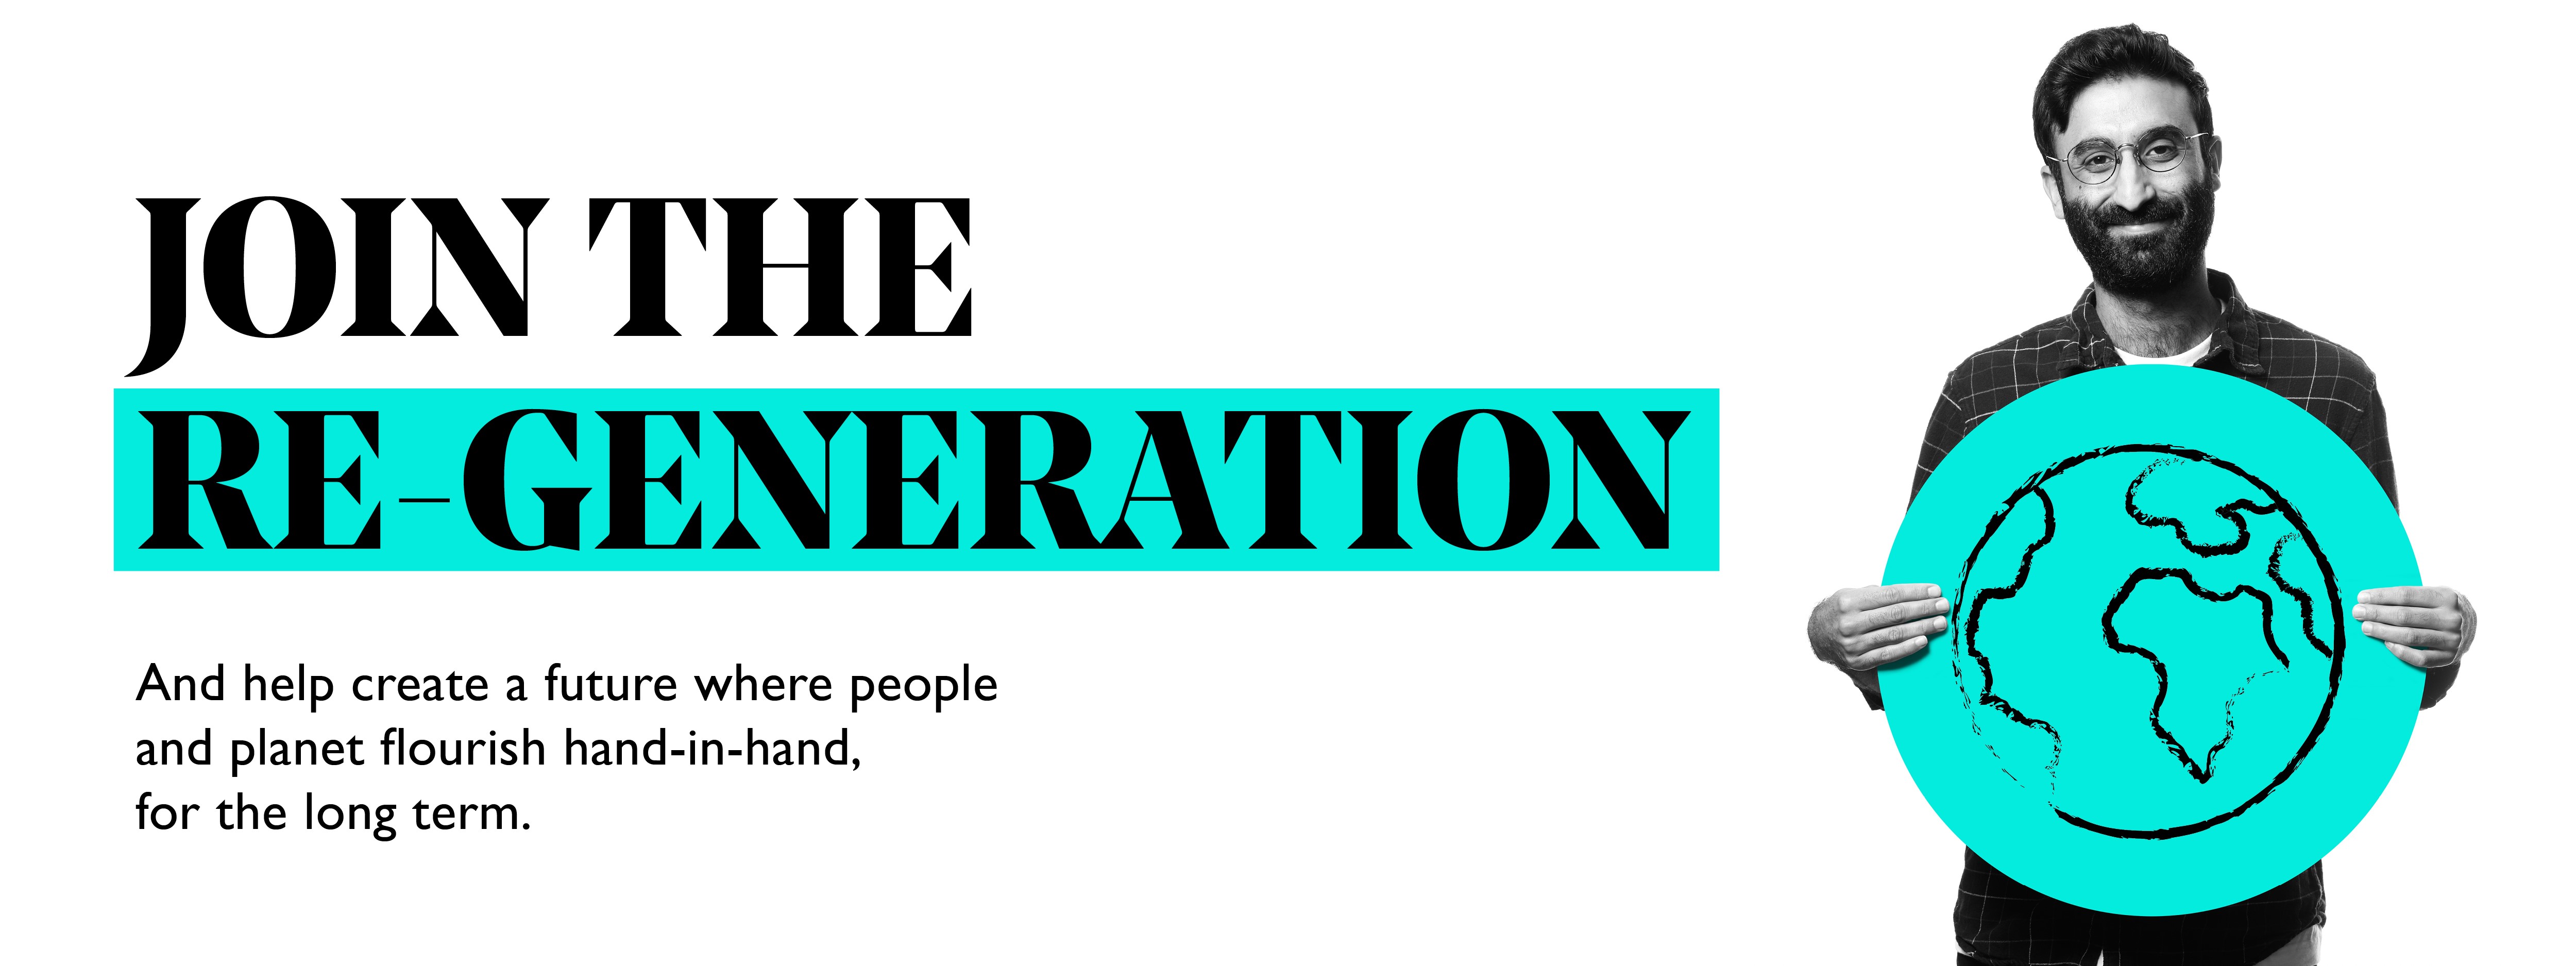 Join the Regeneration: And help create a future where people and planet flourish hand-in-hand, for the long term.